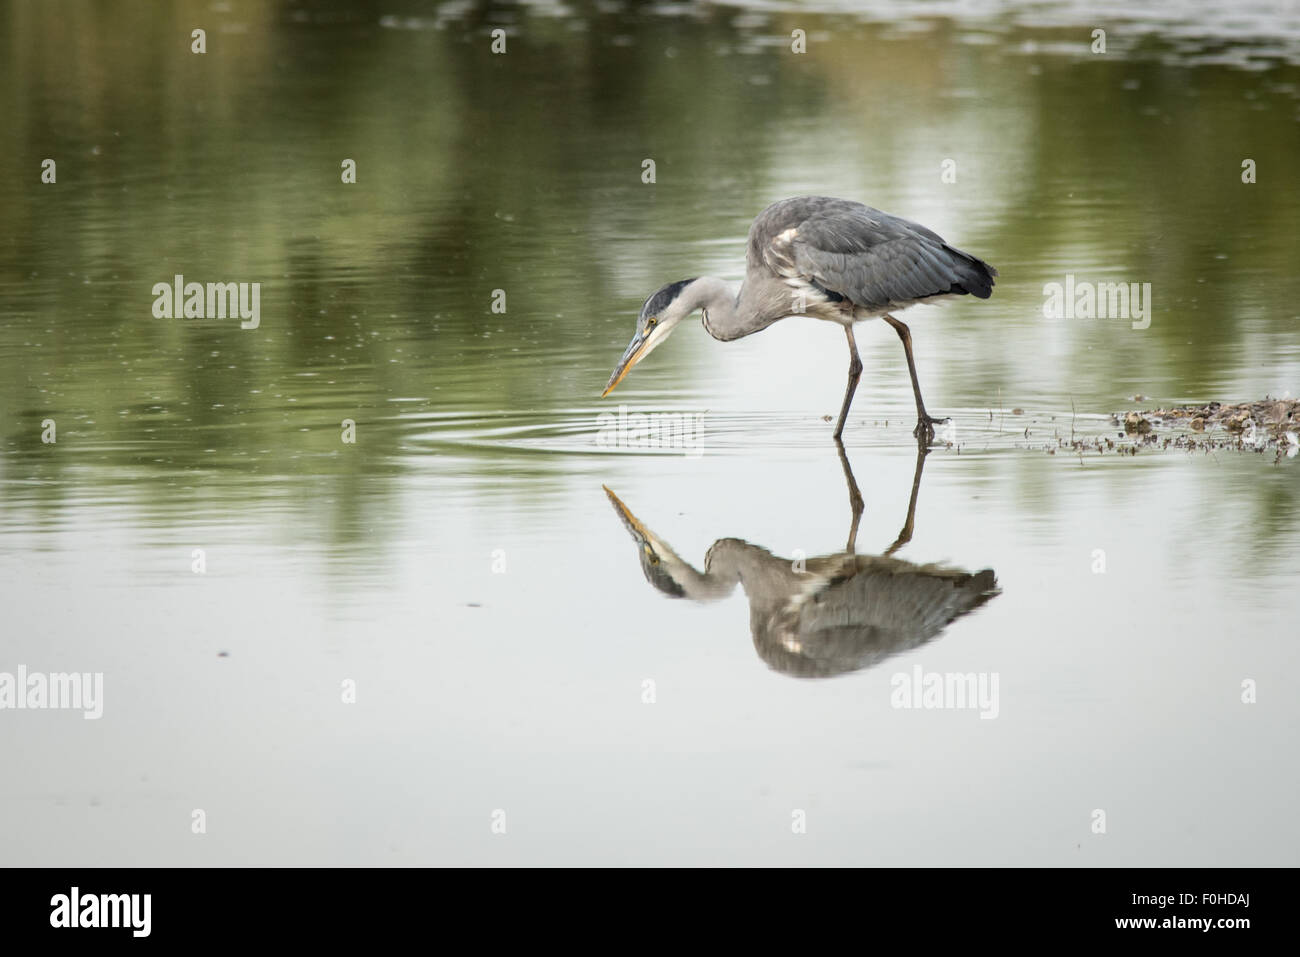 Grey Heron ( Ardea cinerea) Standing in Water with Reflection, Stalking Fish Stock Photo